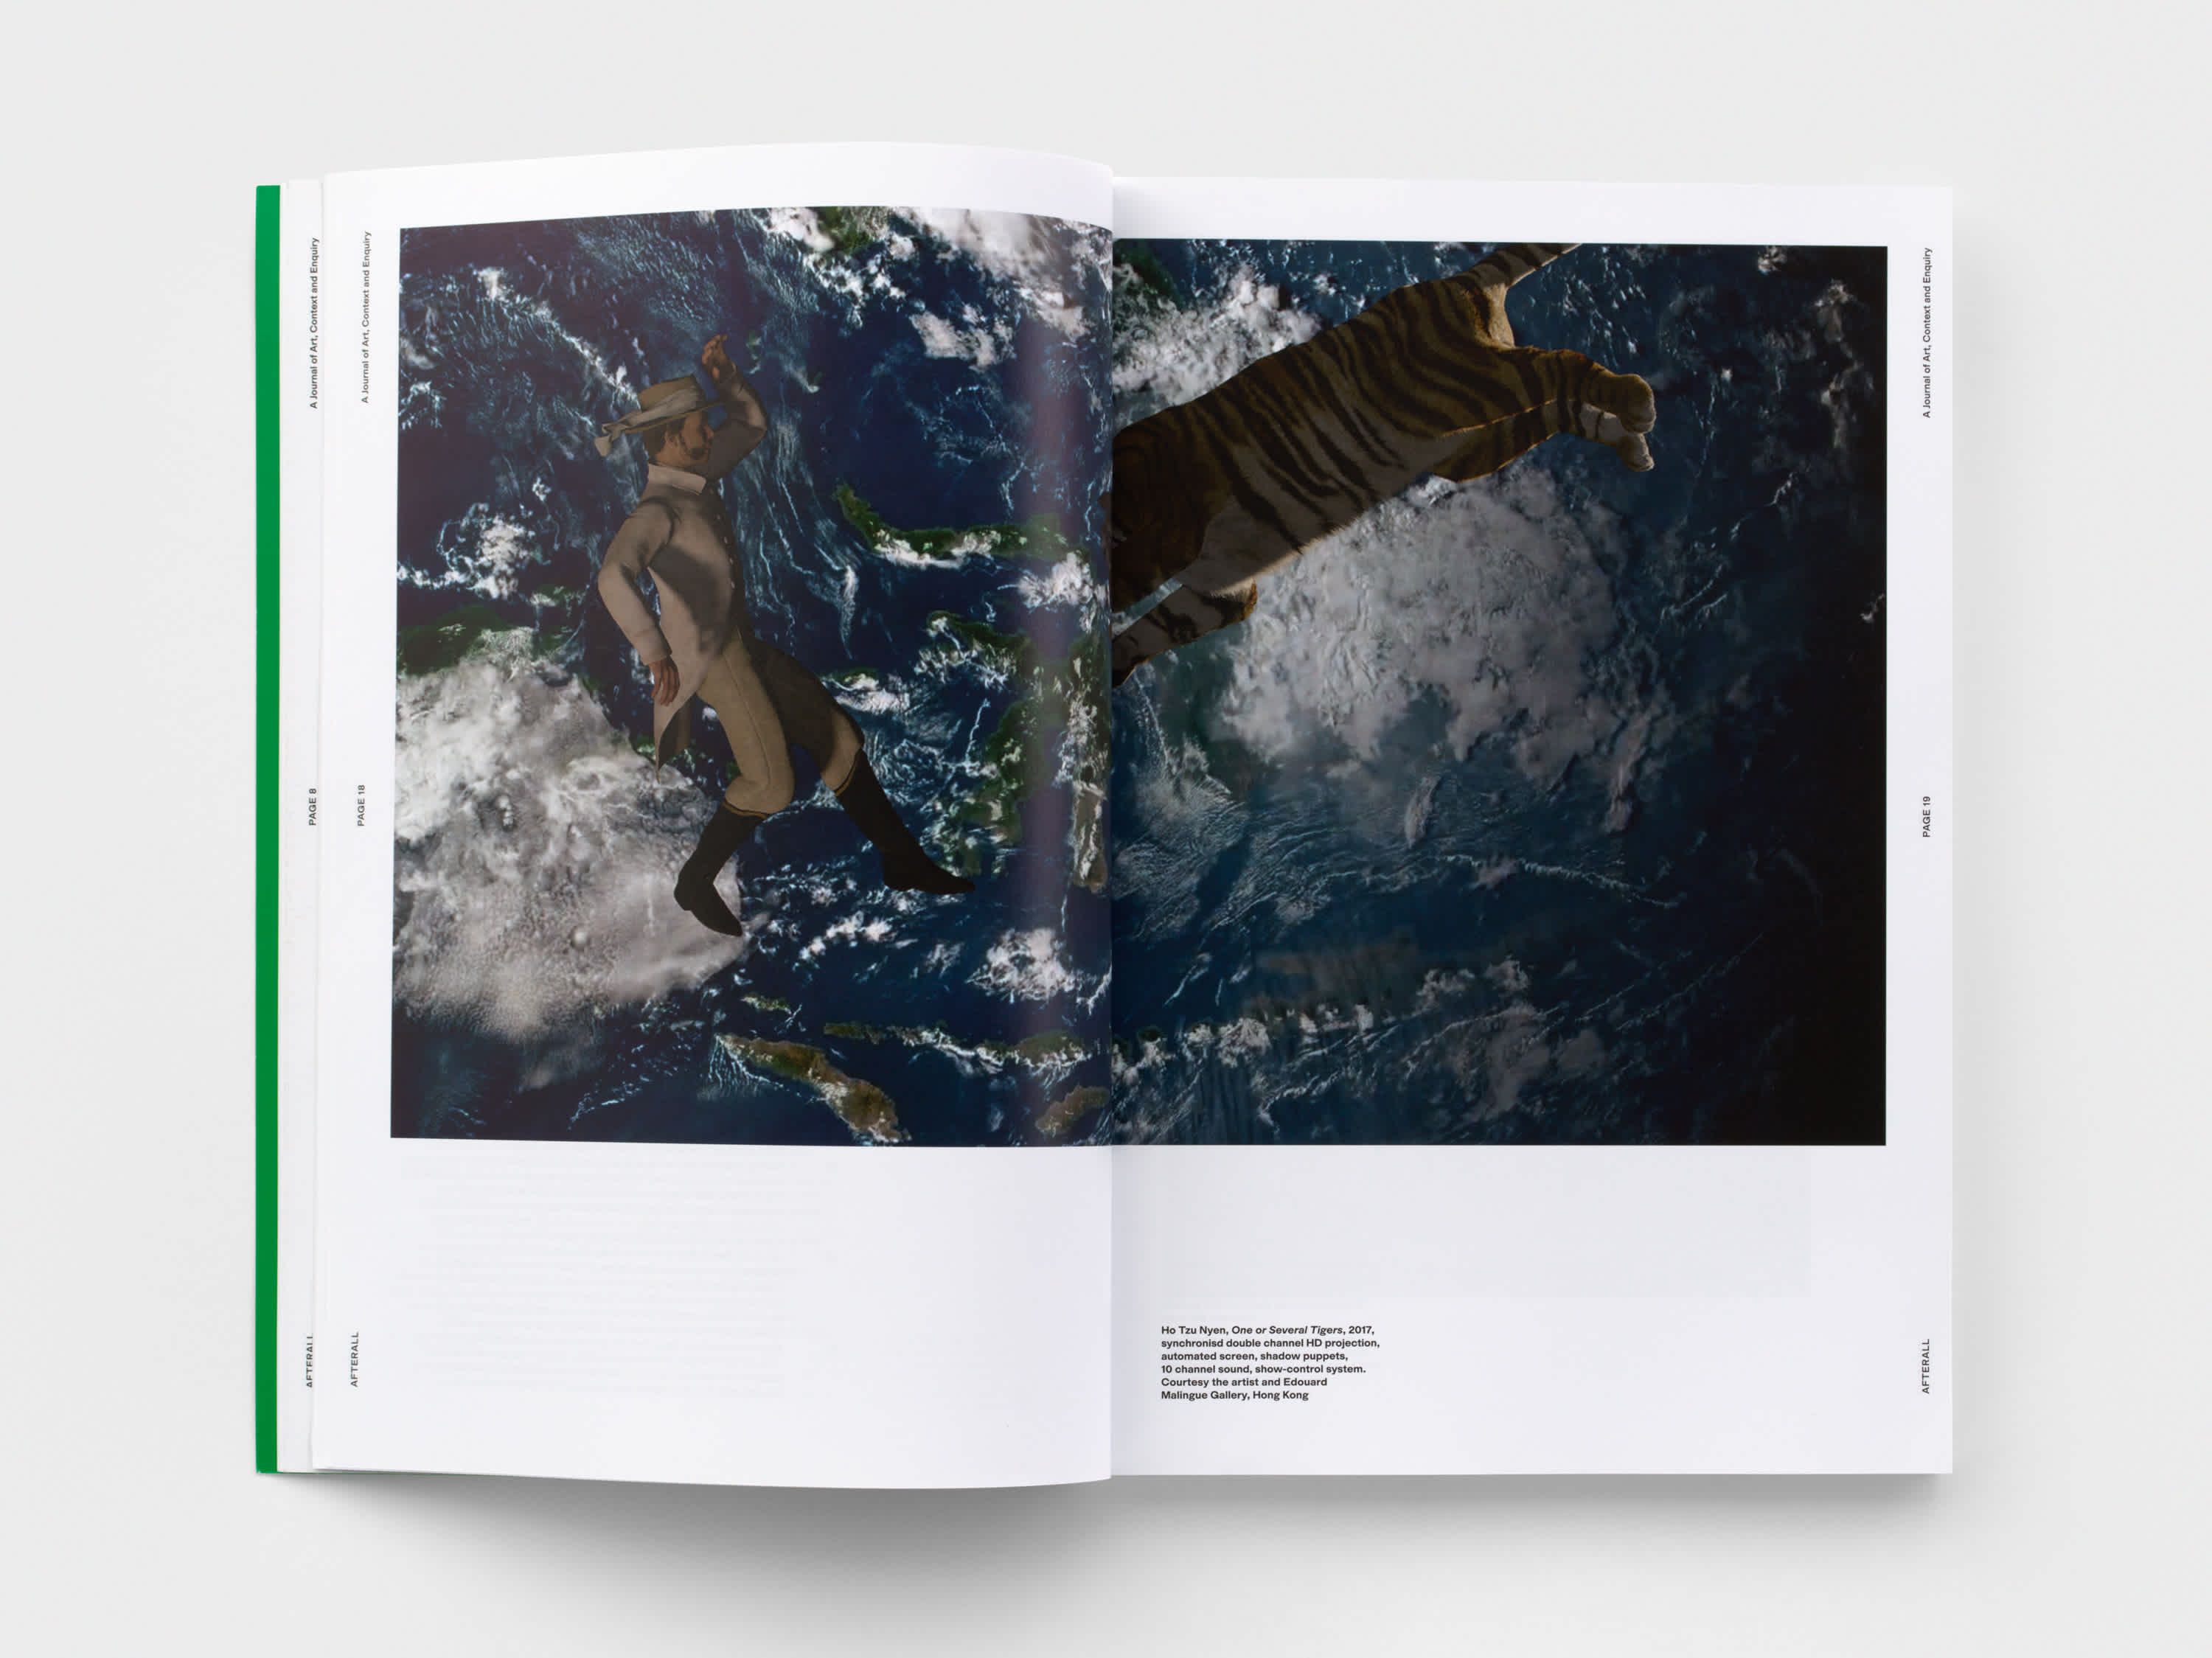 Open magazine with a photograph of the earth from space. There is a tiger and man photoshopped into the image. A white border runs around the image.